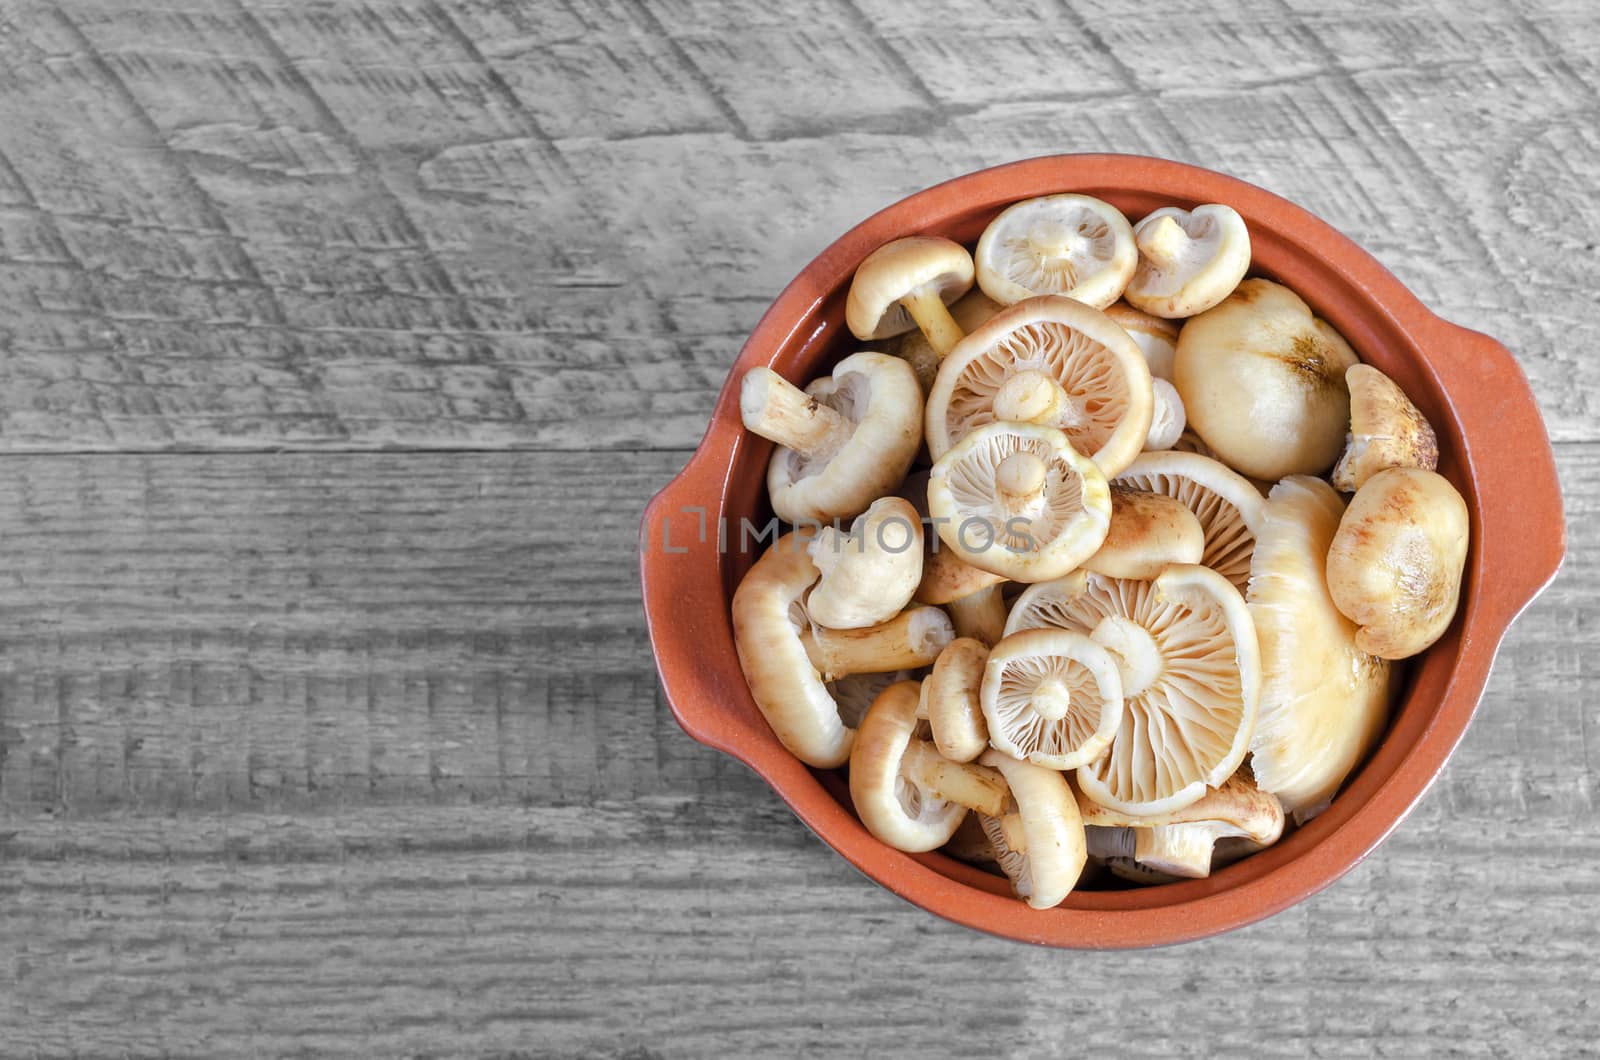 Raw washed mushrooms in a ceramic pot on grey wooden background. The view from the top